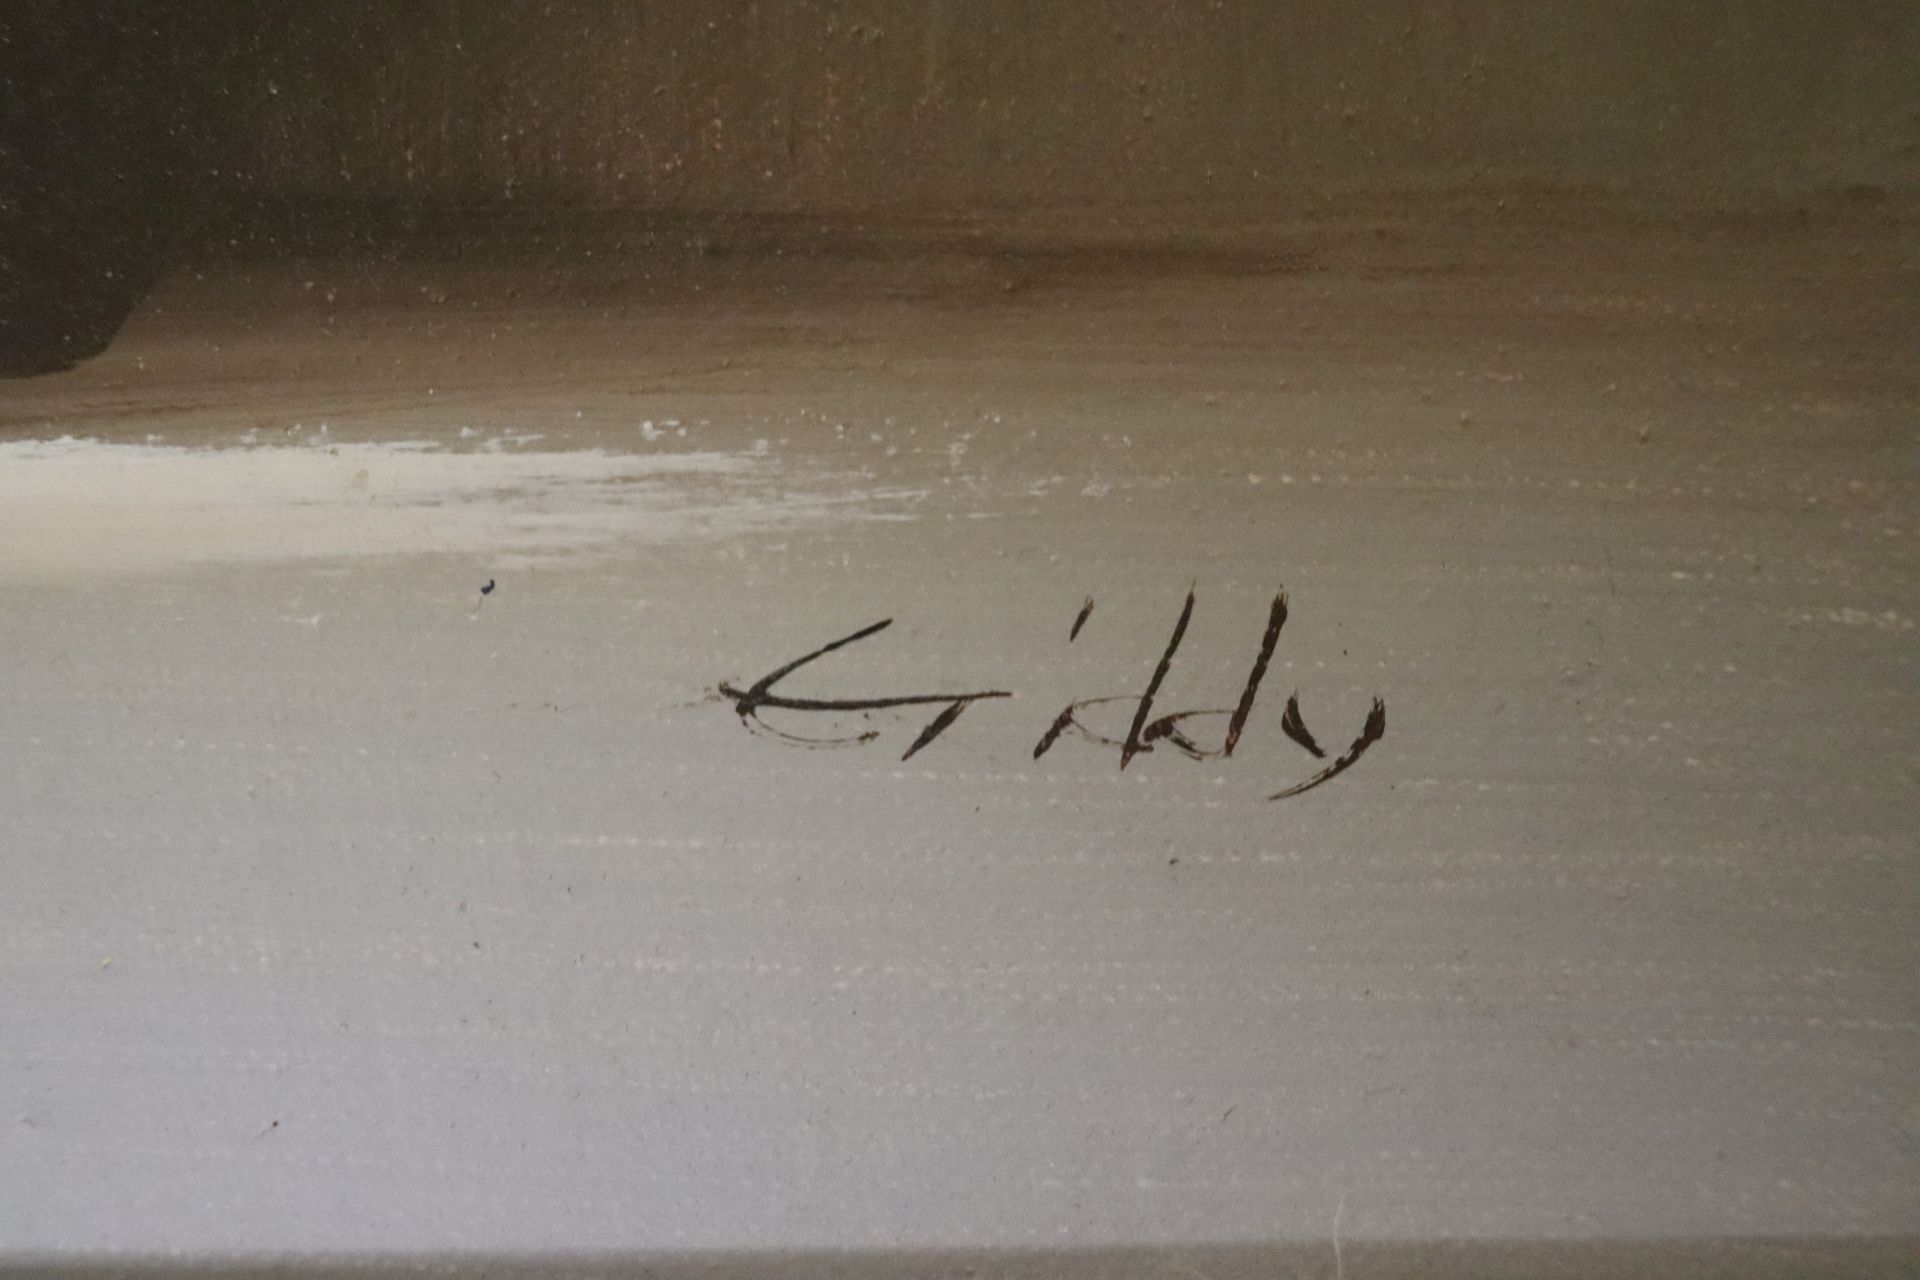 Oil on canvas, signed Erikly, sight size 11-1/2" x 23-1/2" - Image 2 of 3